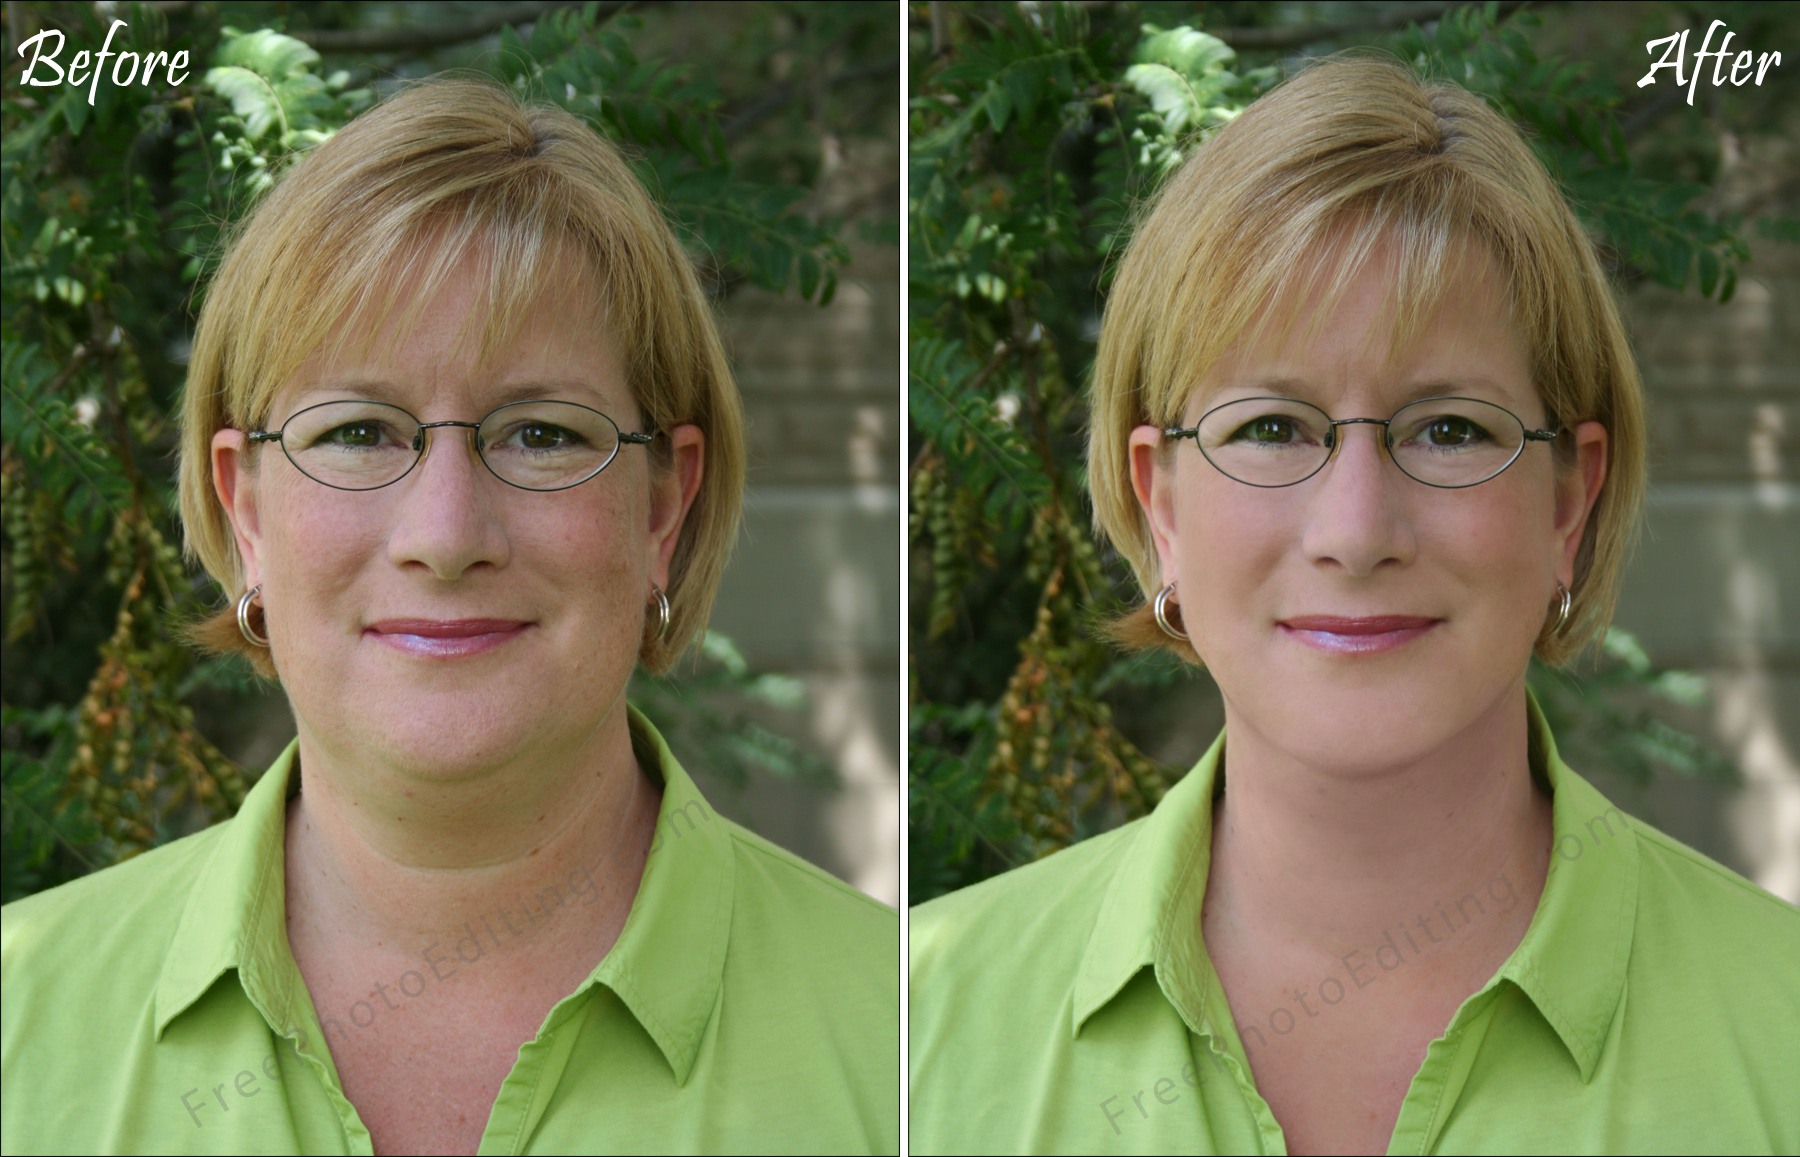 This is an example of airbrushing and photo retouching to make middle-aged subject look younger.